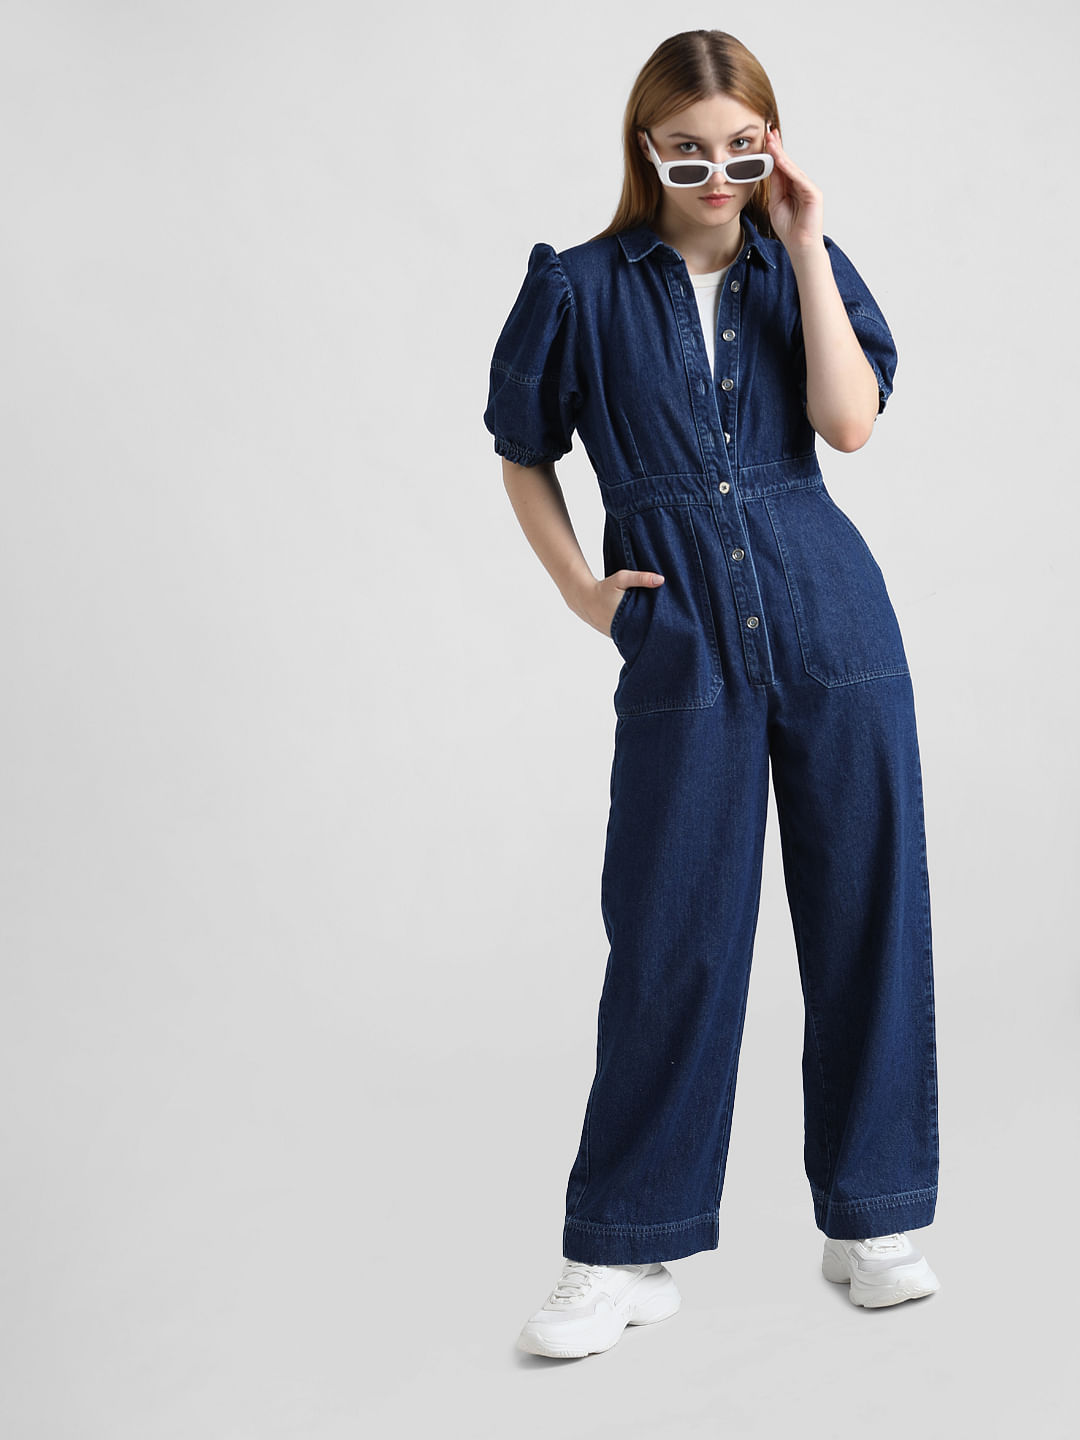 BDG Rosie Utility Jumpsuit on Sale at Urban Outfitters 2019 | The Strategist